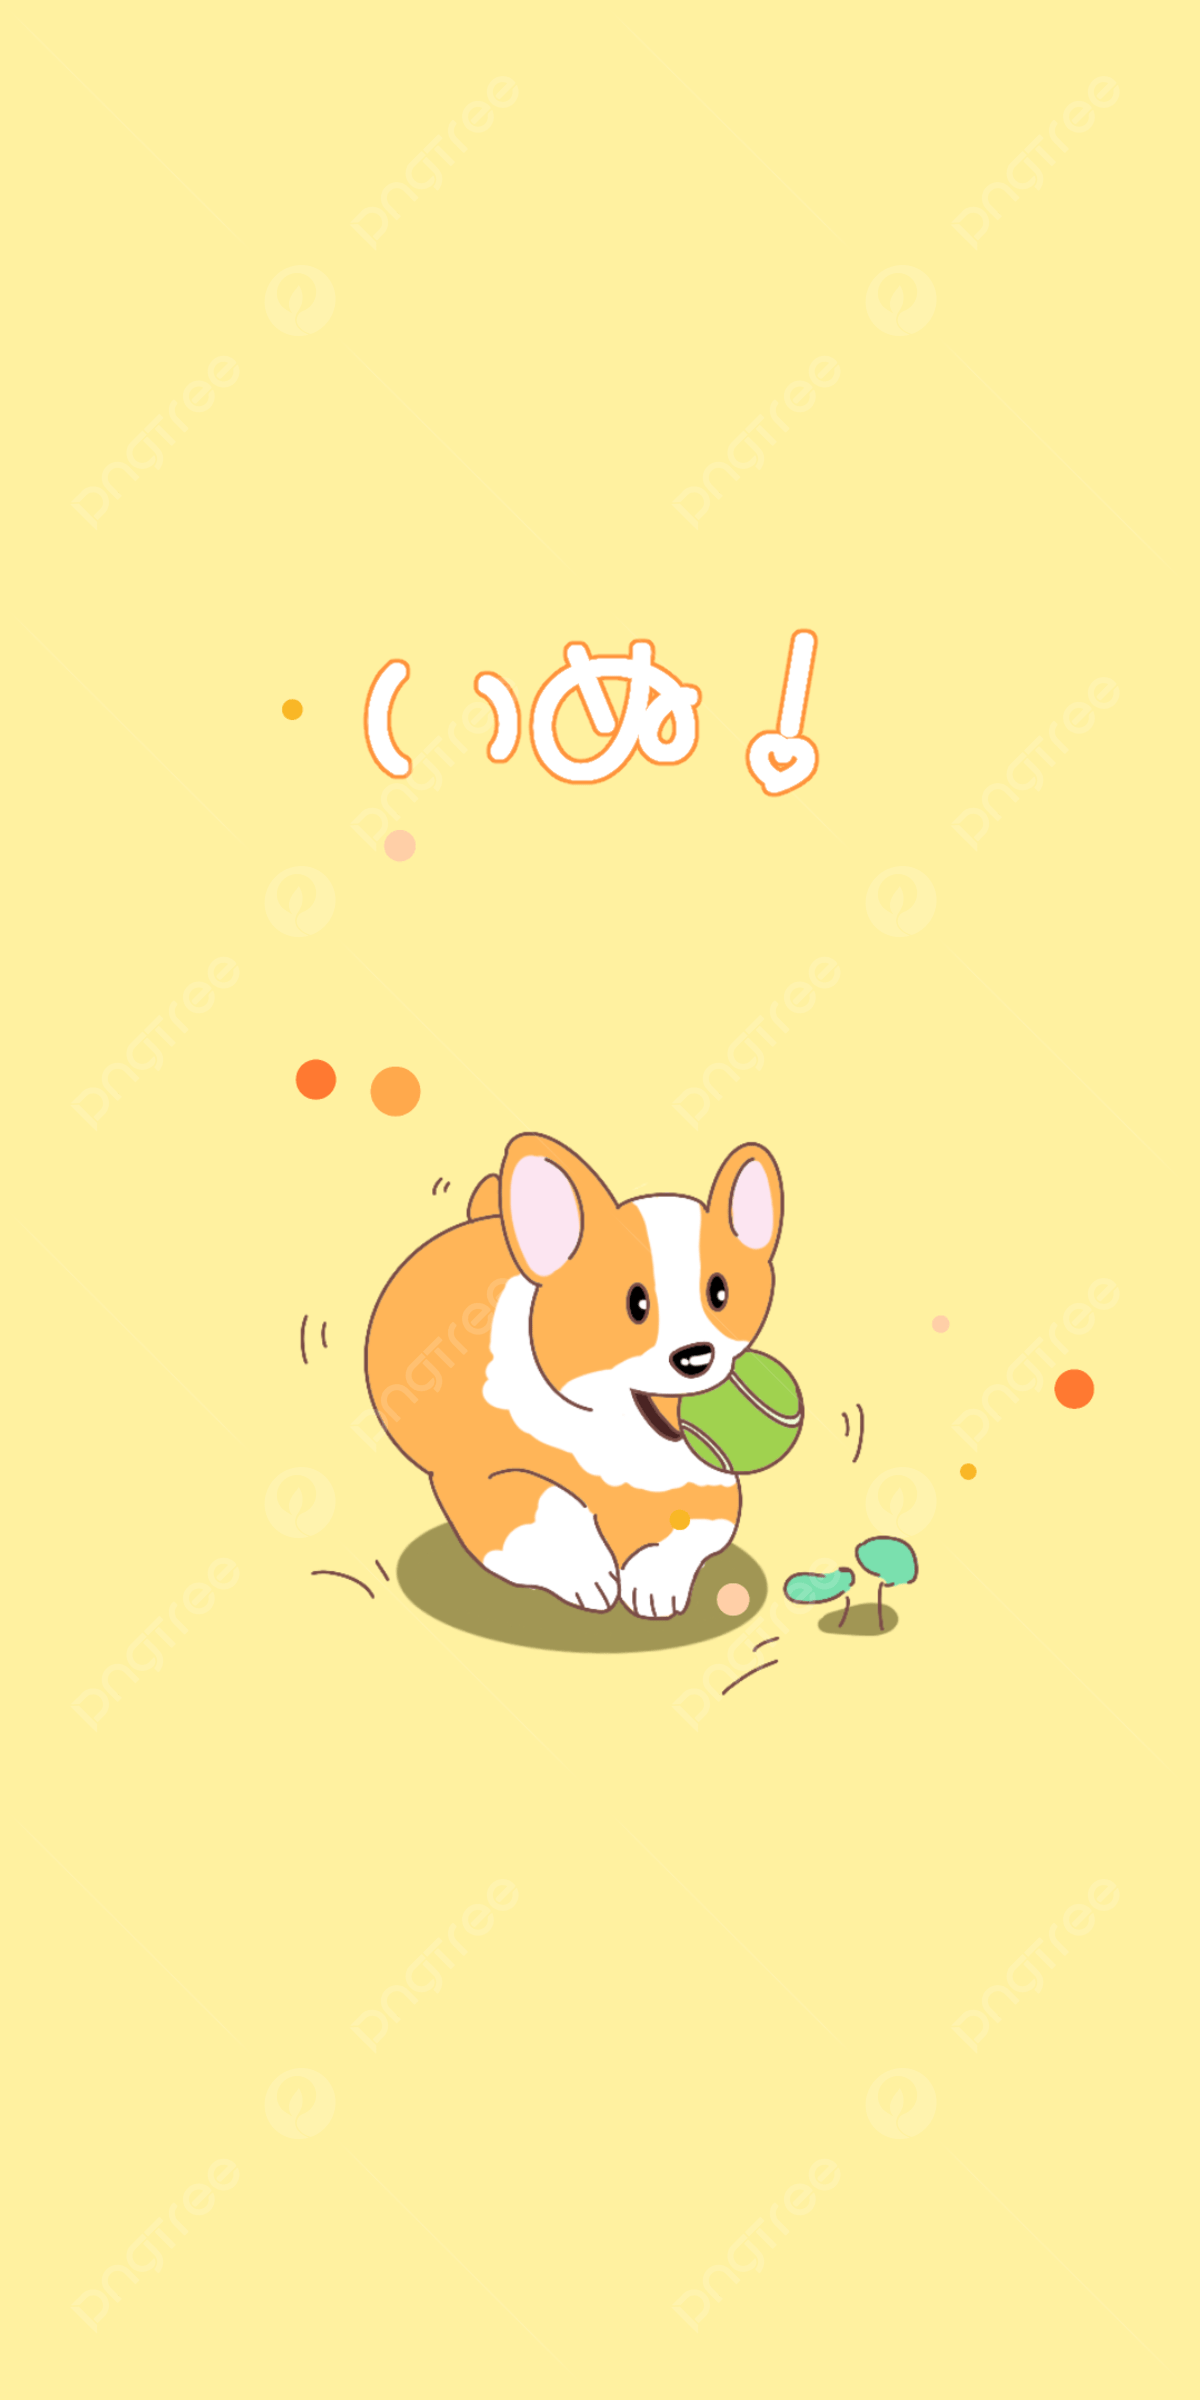 Cute Corgi Playing Ball Wallpaper Background, Yellow, Bobo Ball, Small Green Shoots Background Image for Free Download